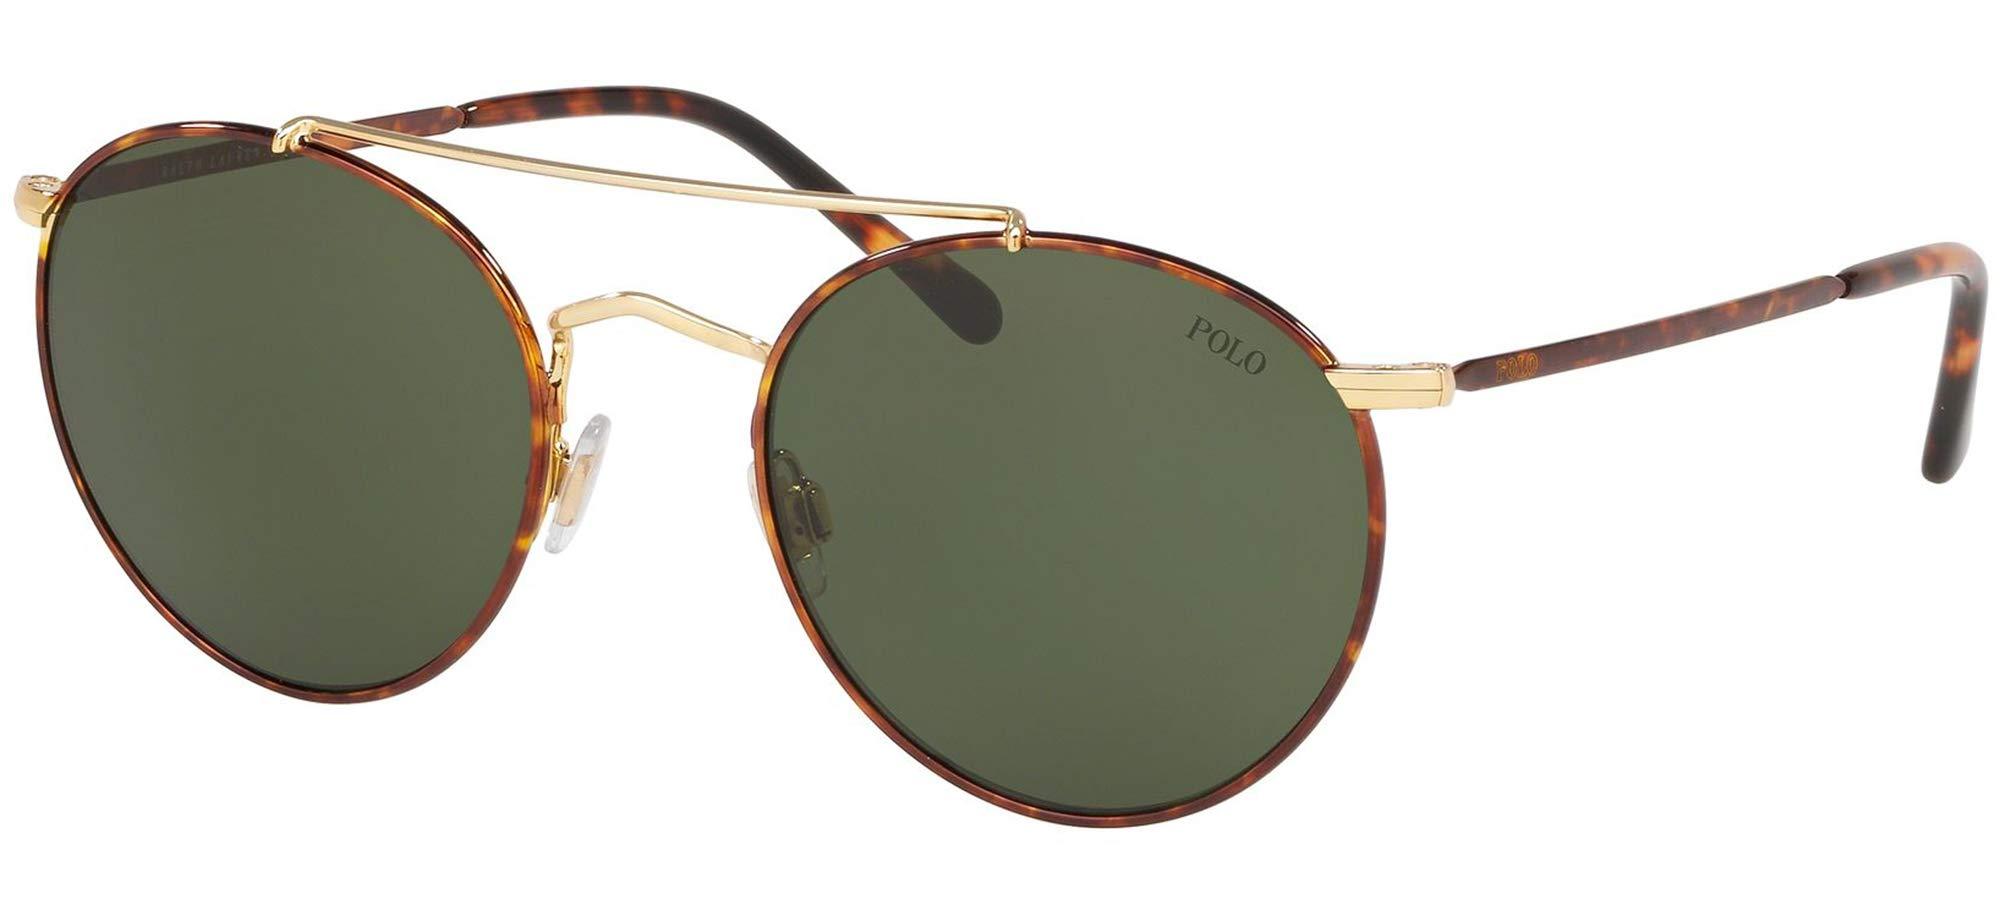 Polo Ralph Lauren Ph3114 Metal Round Sunglasses in Green for Men - Save 28%  - Lyst